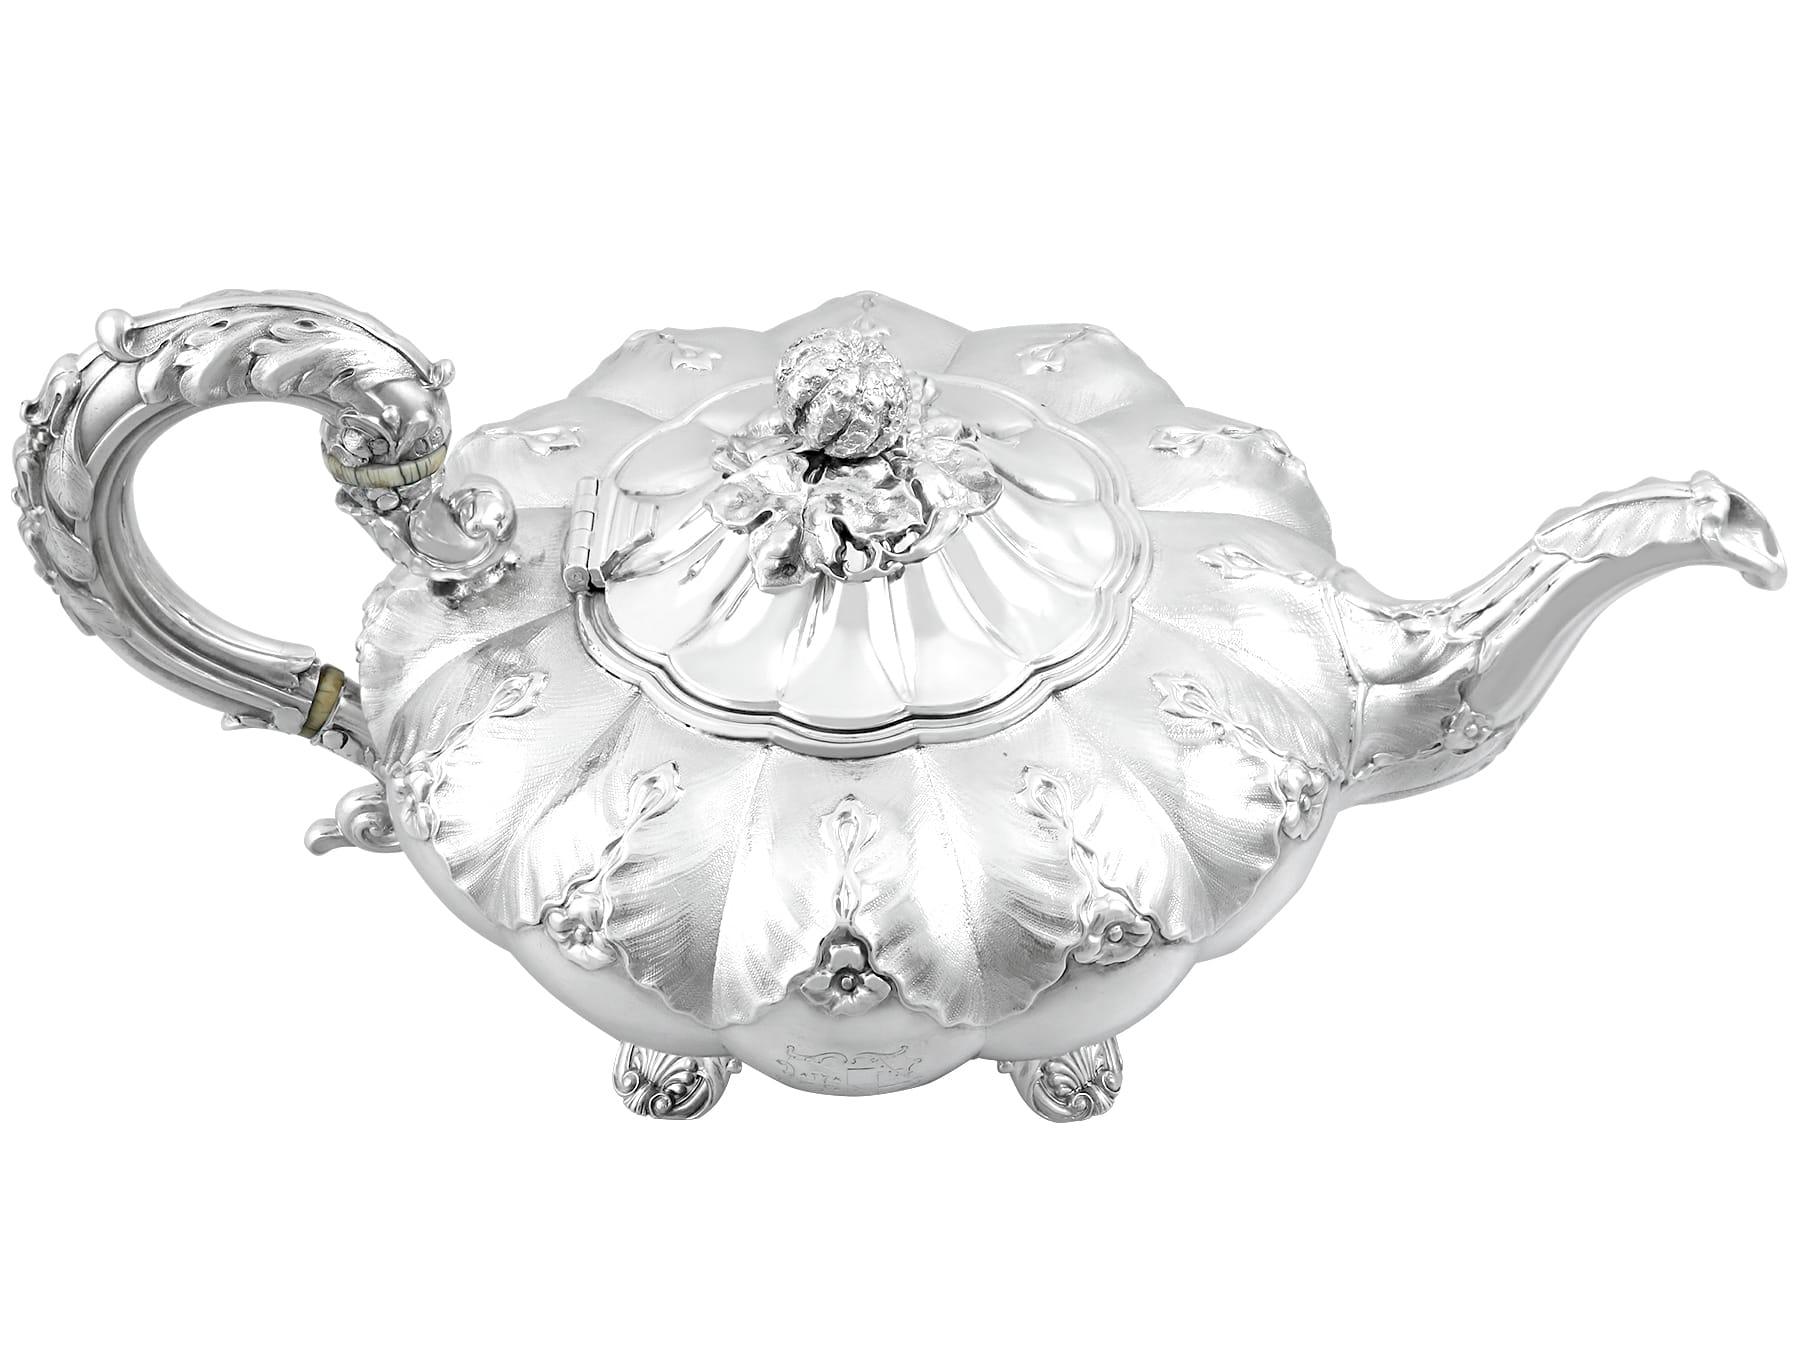 An exceptional, fine and impressive 19th Century antique George IV English sterling silver teapot; an addition to our silver teaware collection

This exceptional, fine and impressive antique George IV sterling silver teapot has a compressed pumpkin